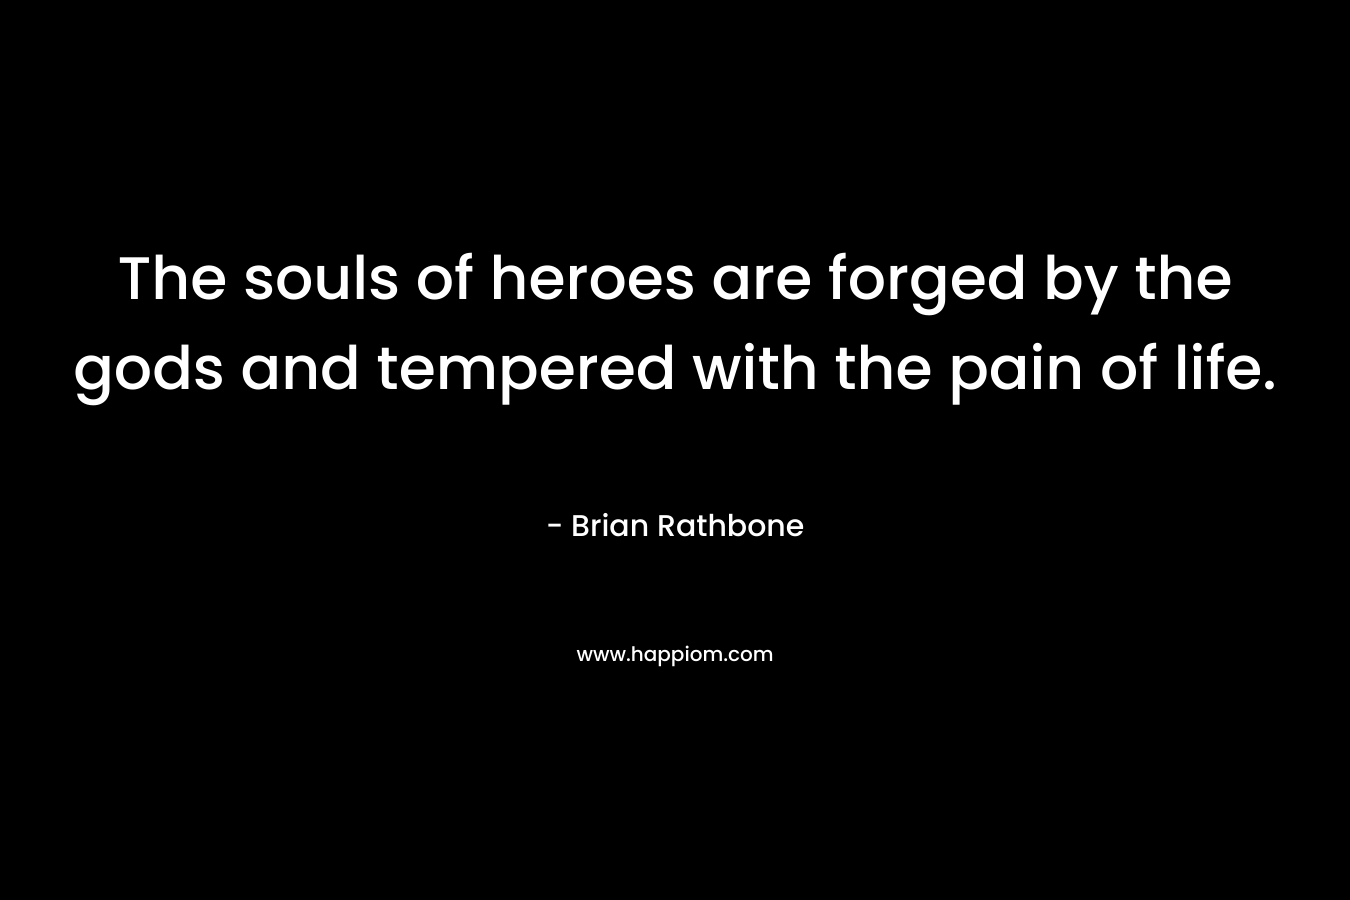 The souls of heroes are forged by the gods and tempered with the pain of life.